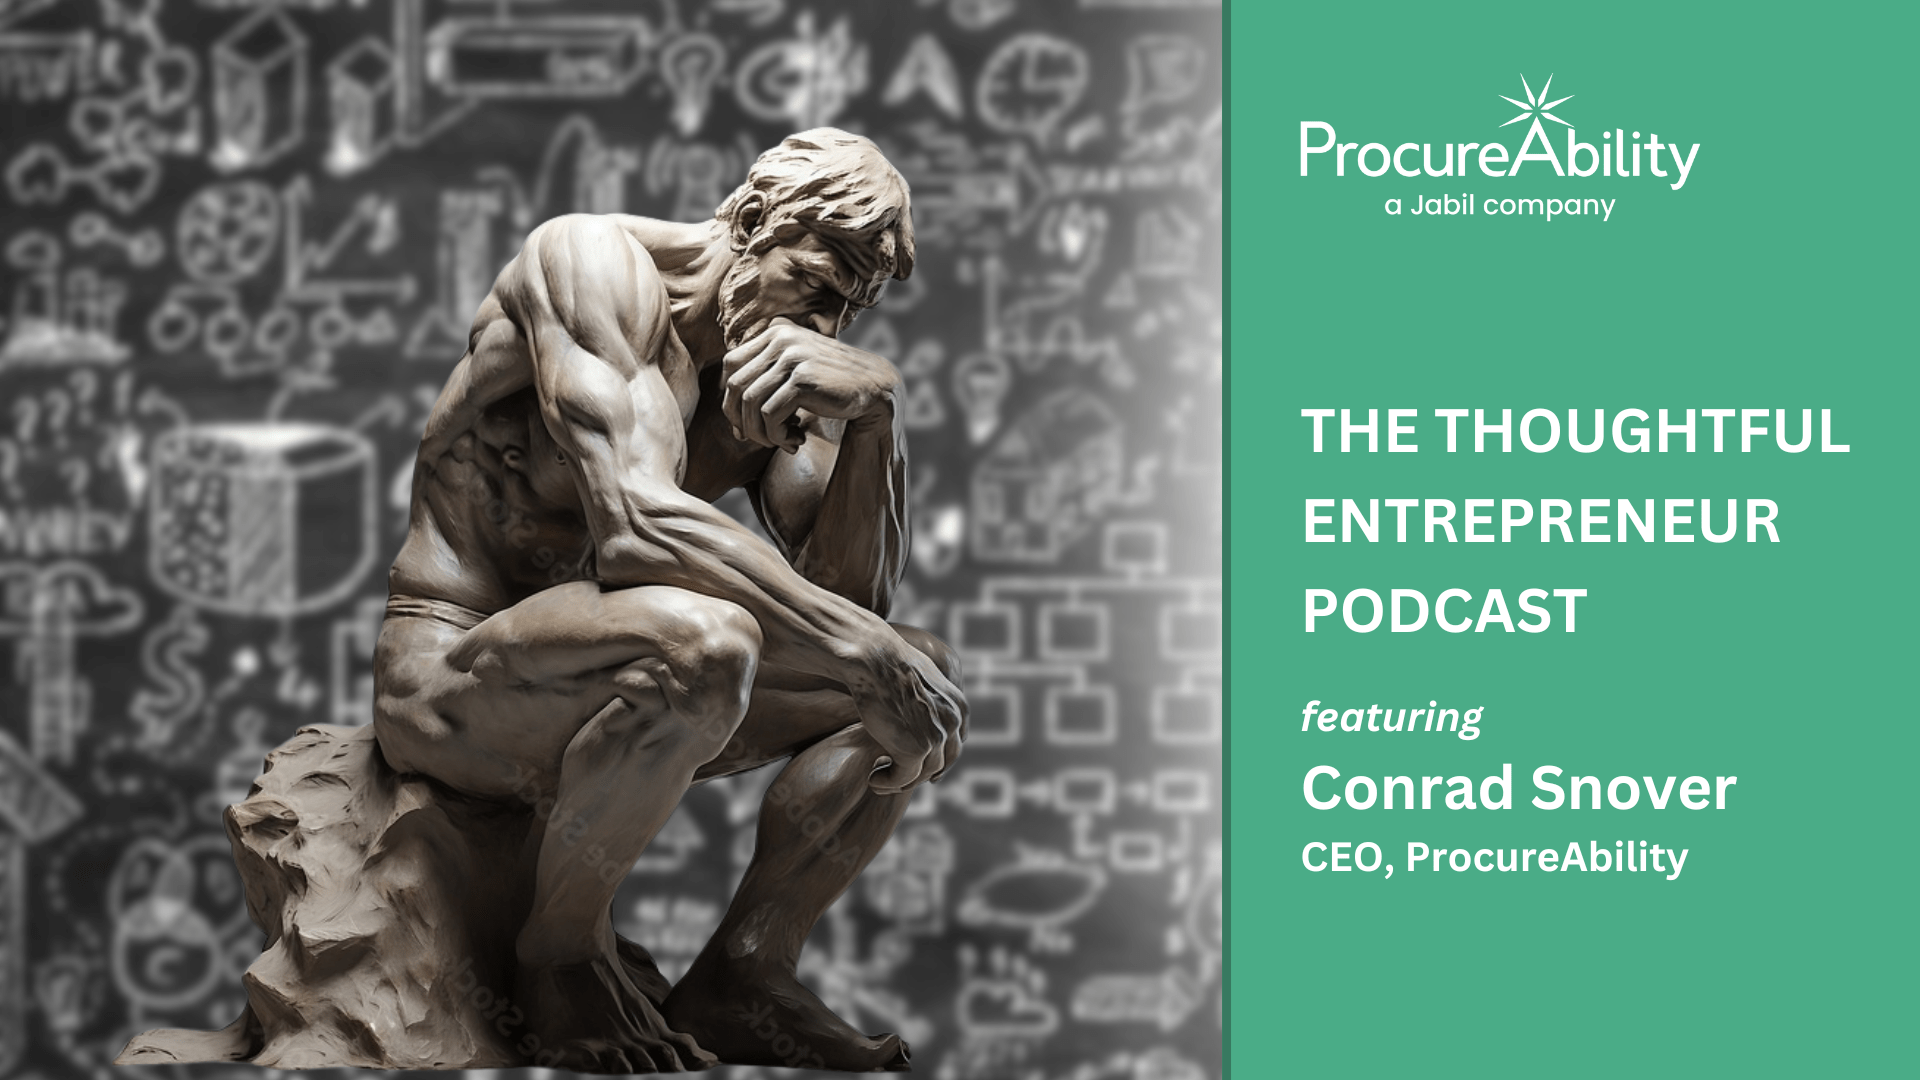 The Thoughtful Entrepreneur: Featuring Conrad Snover, CEO of ProcureAbility